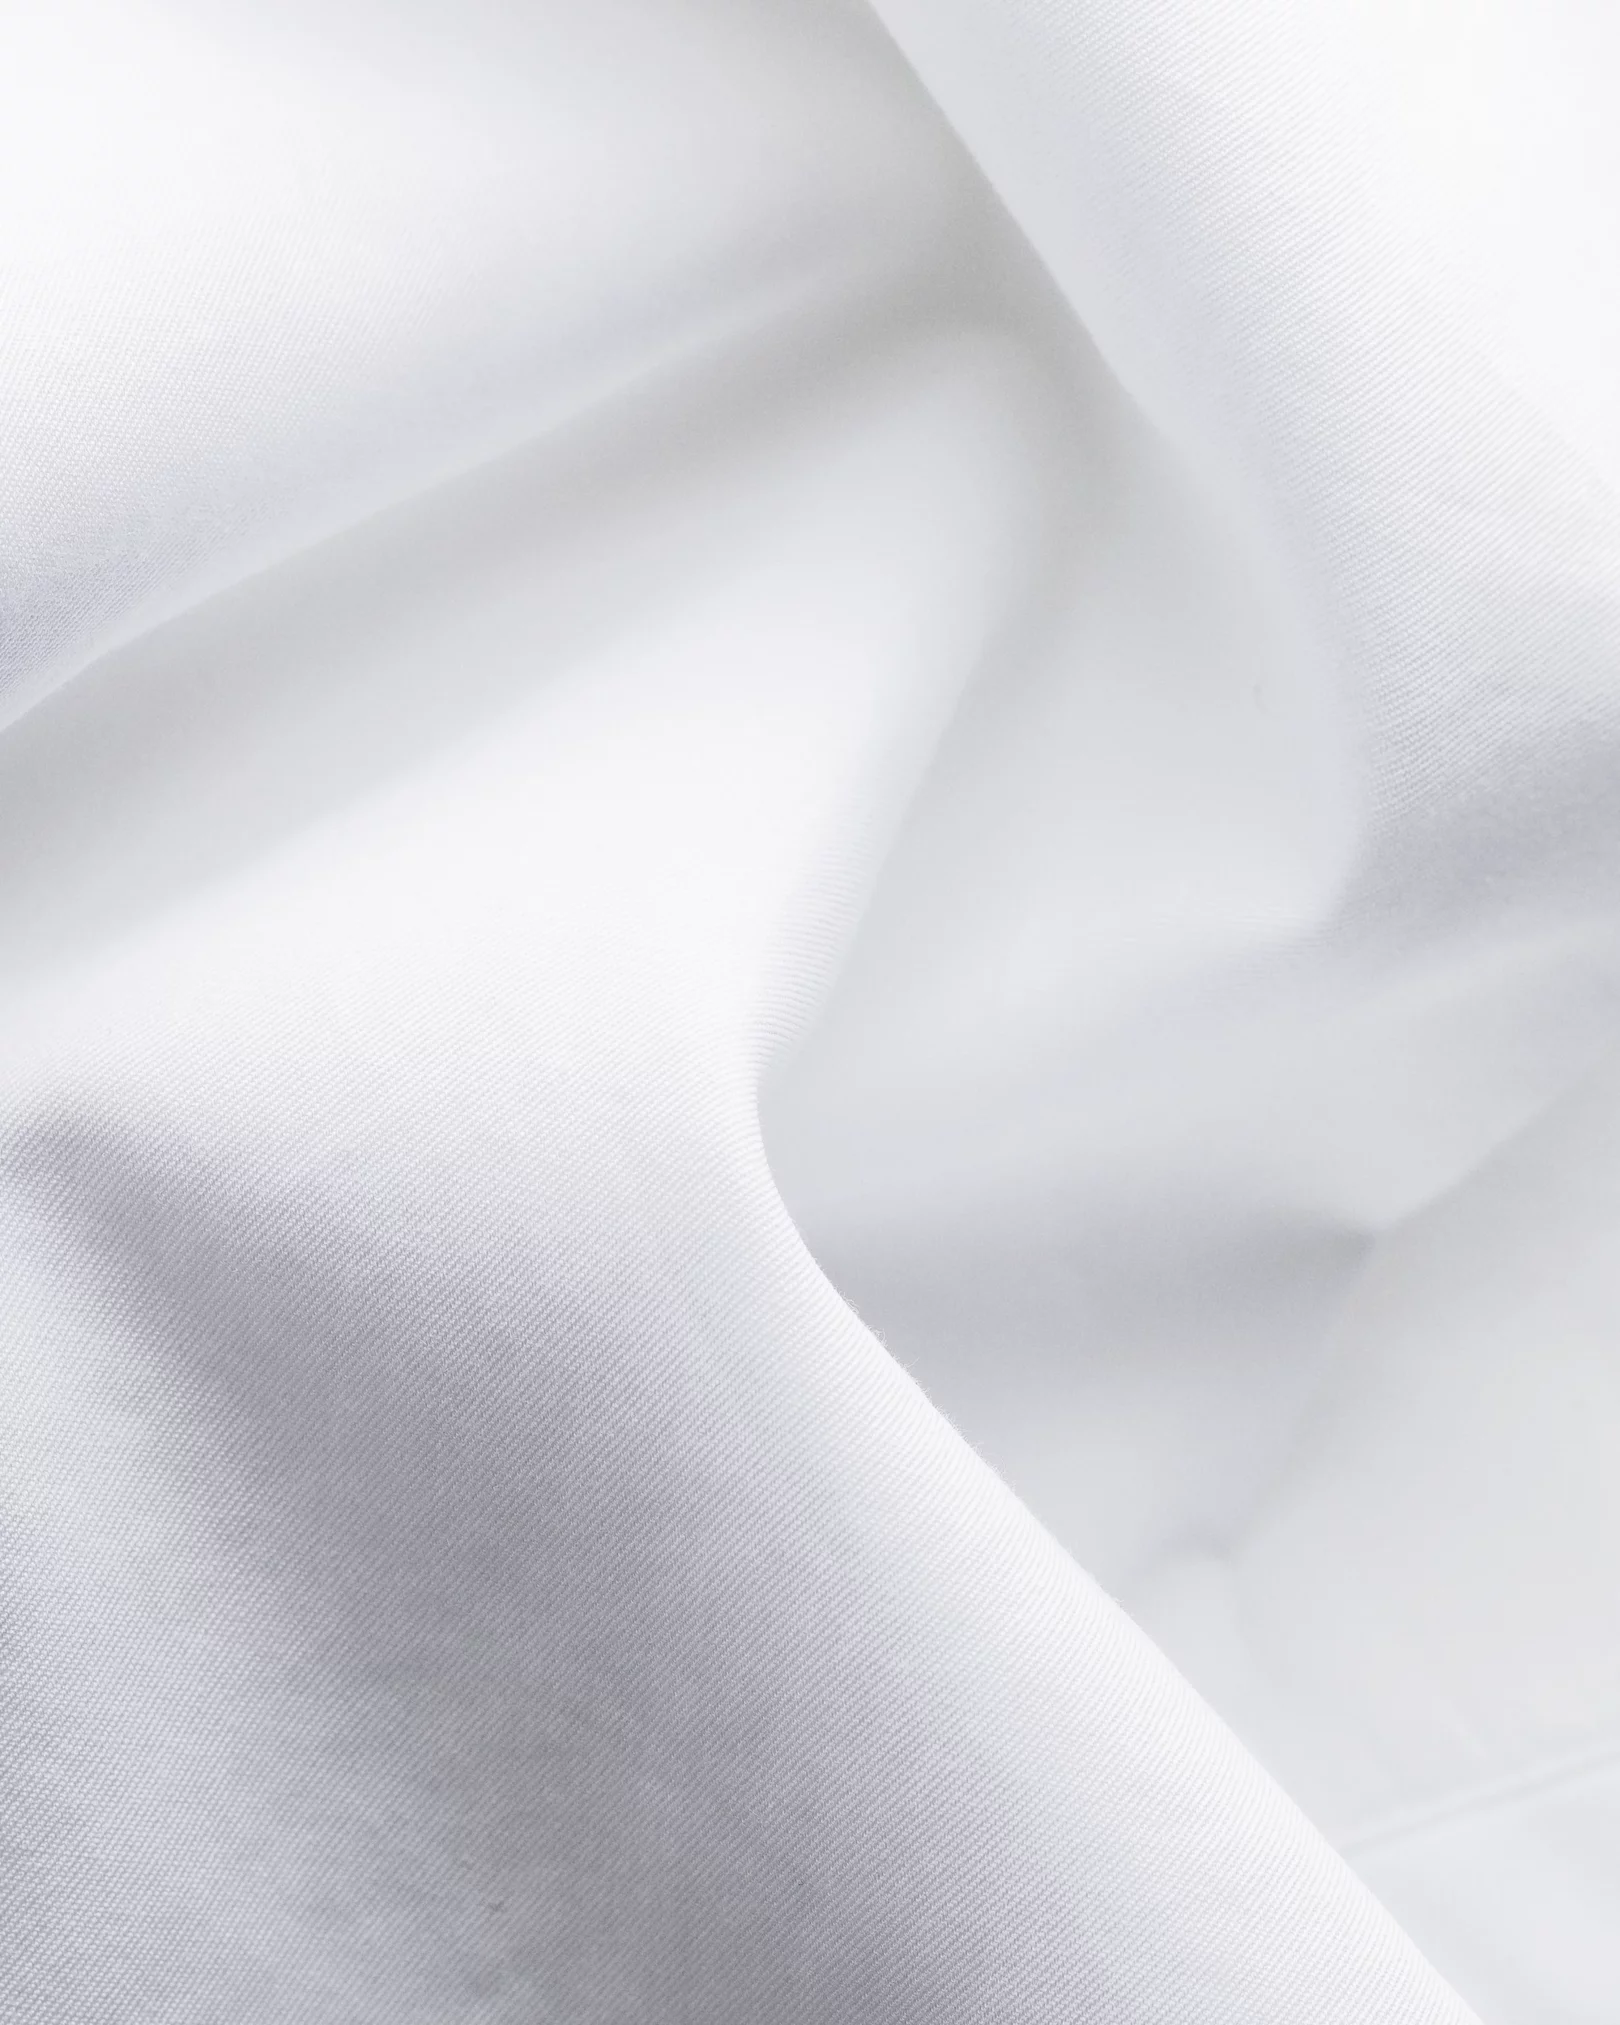 Selling Tencel™ Modal Blended With Cotton Fabrics - Modal Cotton Shirt  Material Super Smooth, Soft, Premium Quality